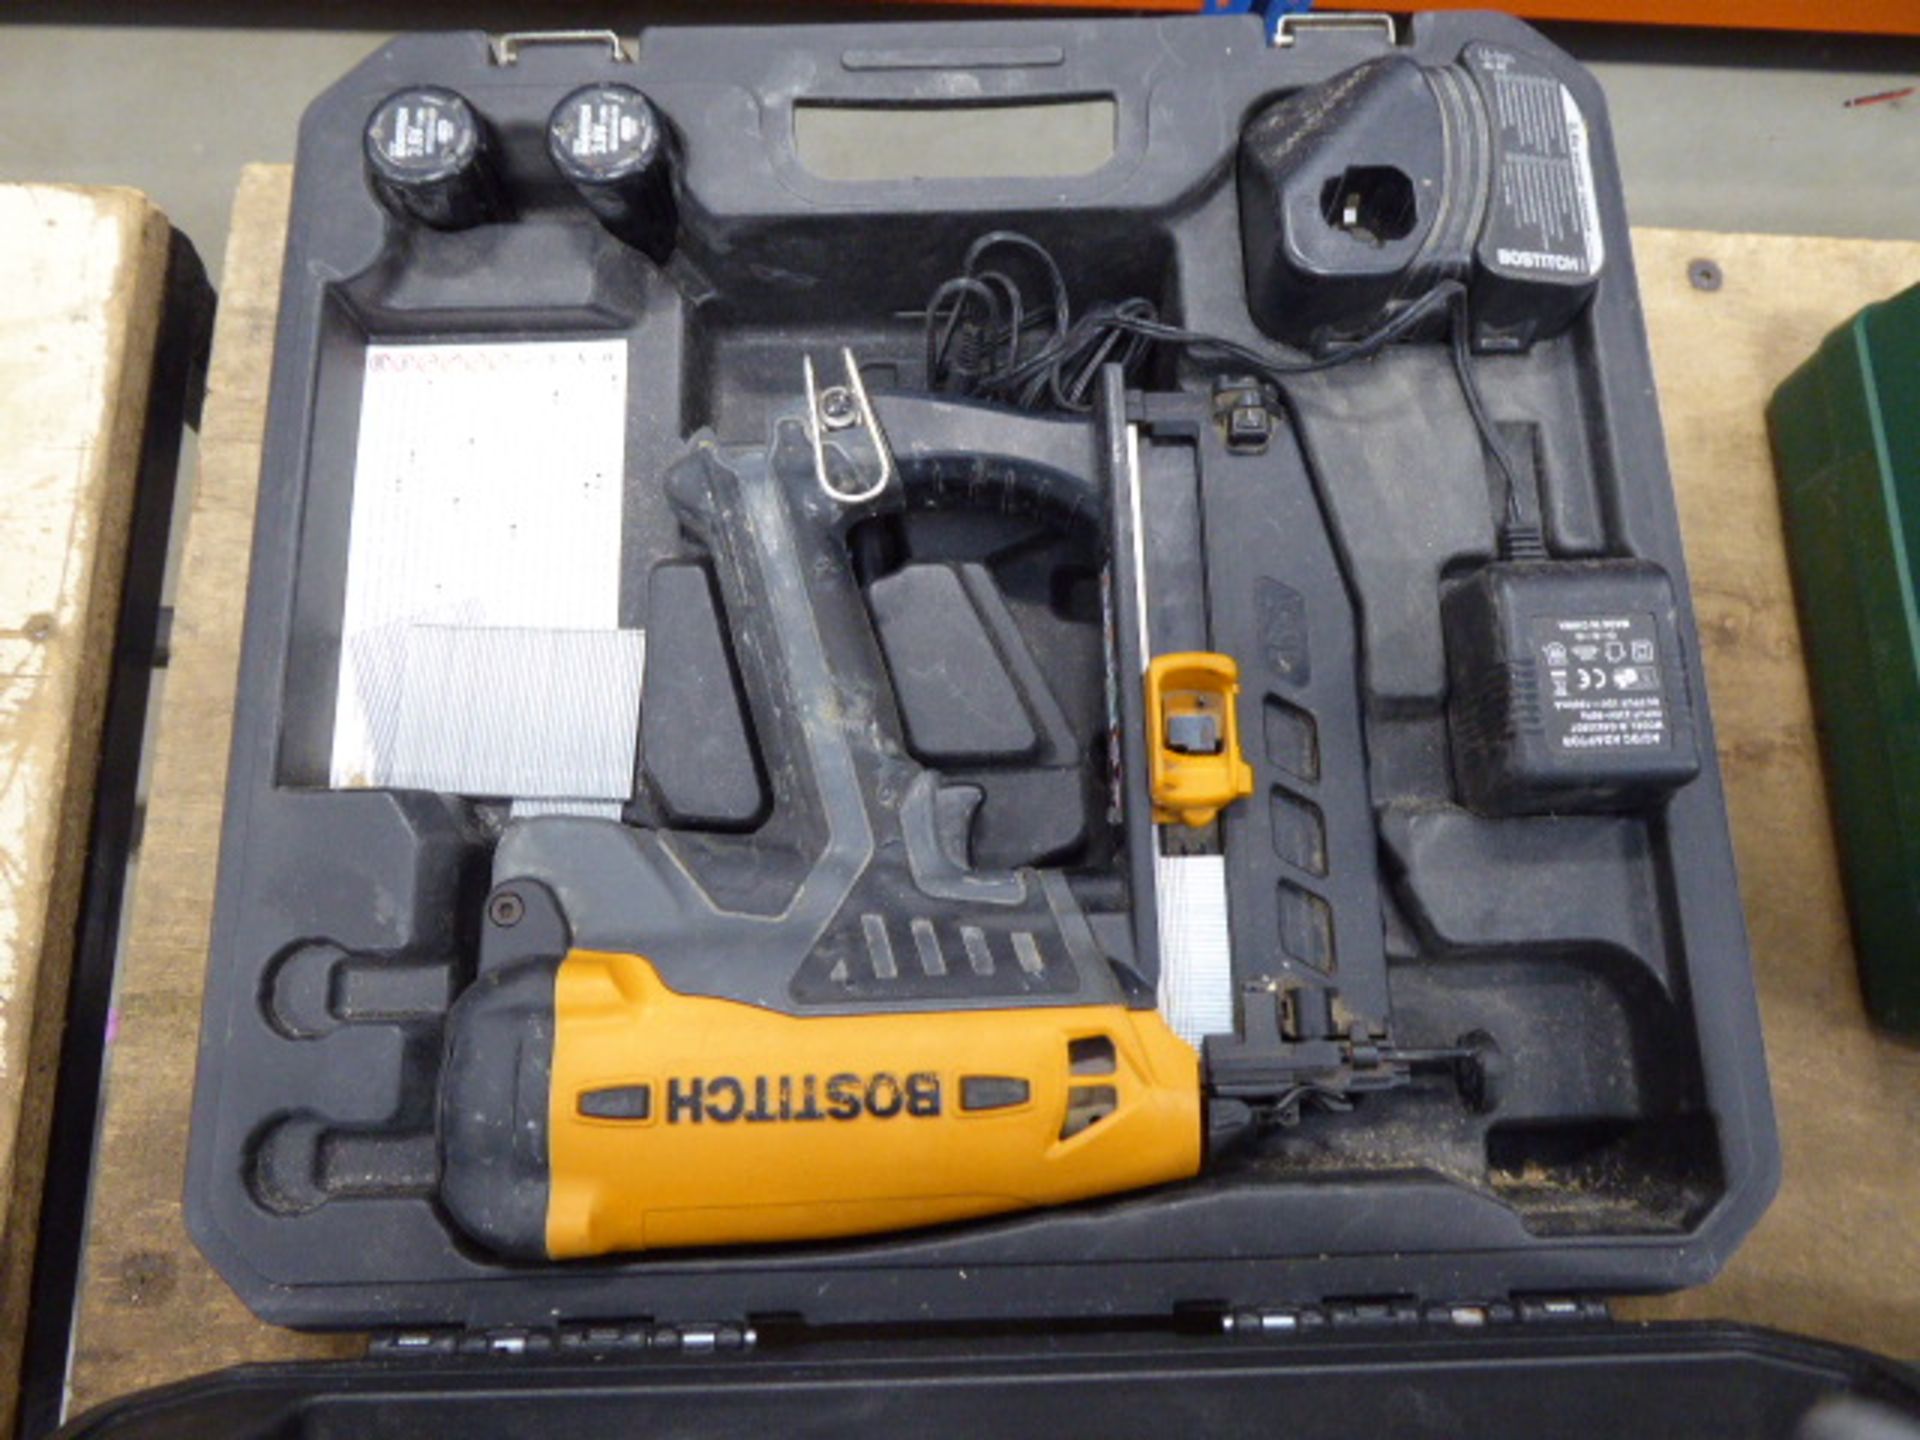 Bostitch battery powered nailer with 2 batteries and charger